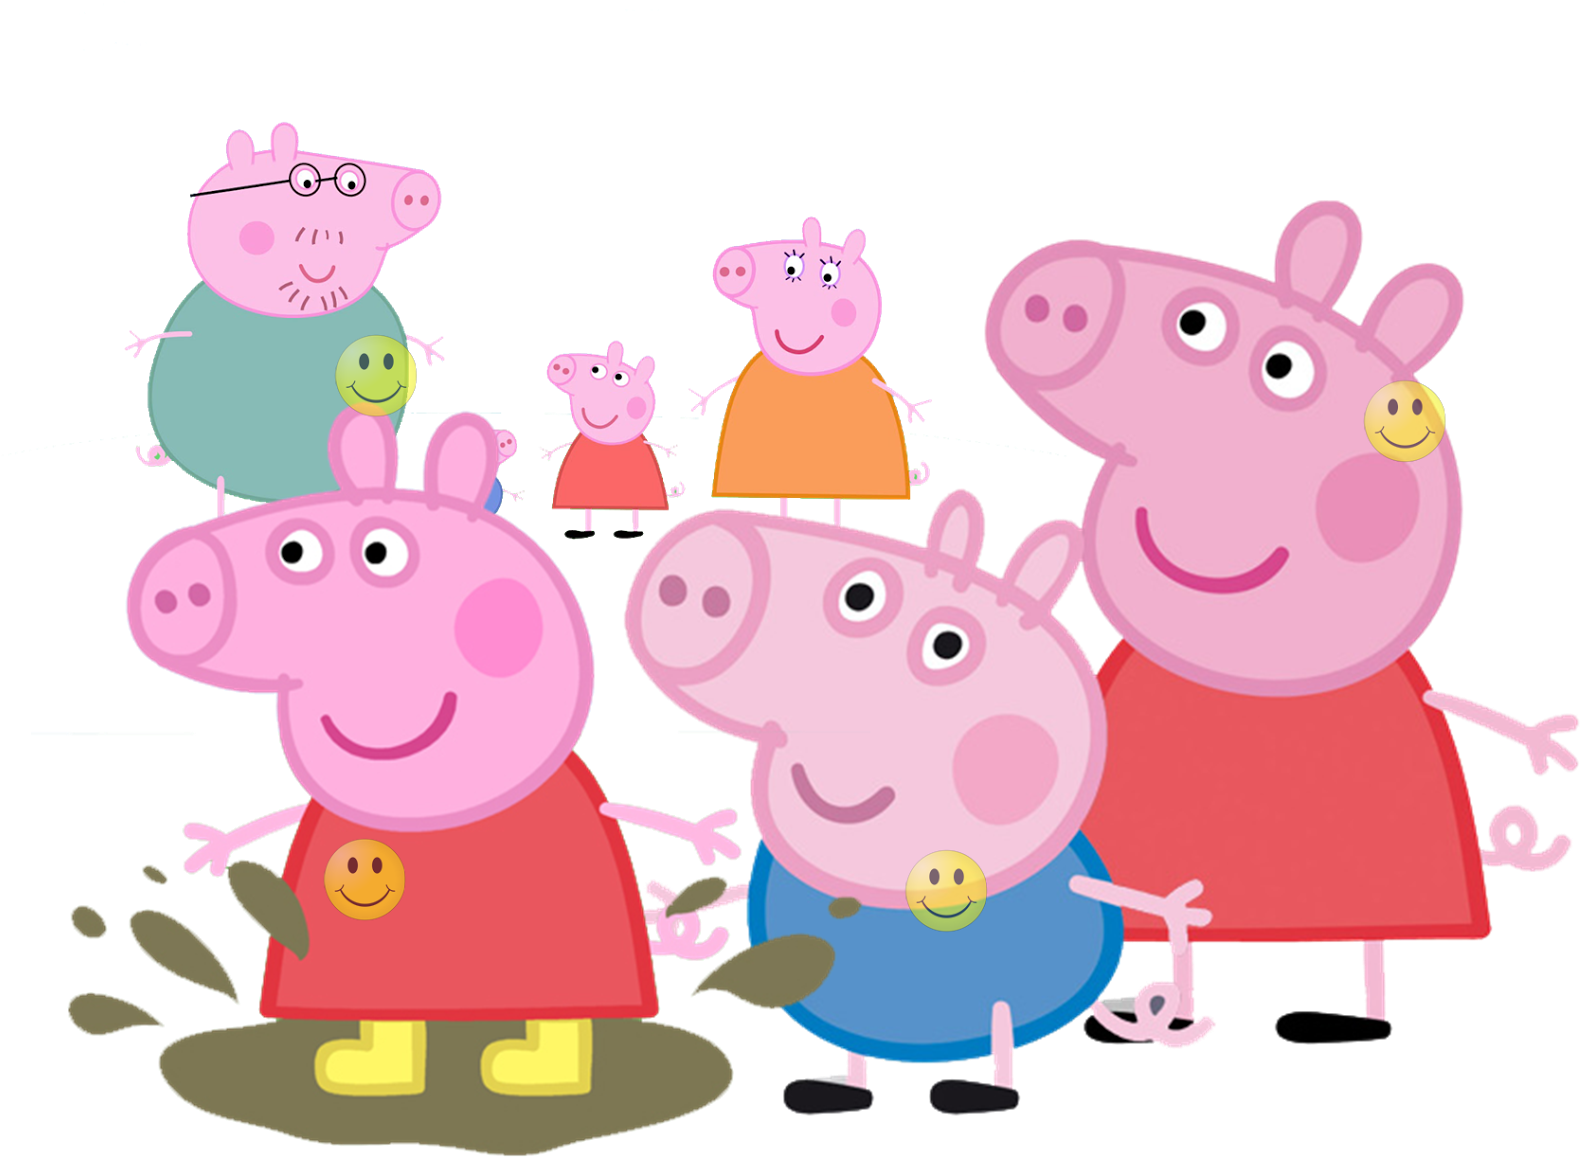 Peppa Pig And Family Wallpapers Hd - Peppa Pig .png (1600x1217)